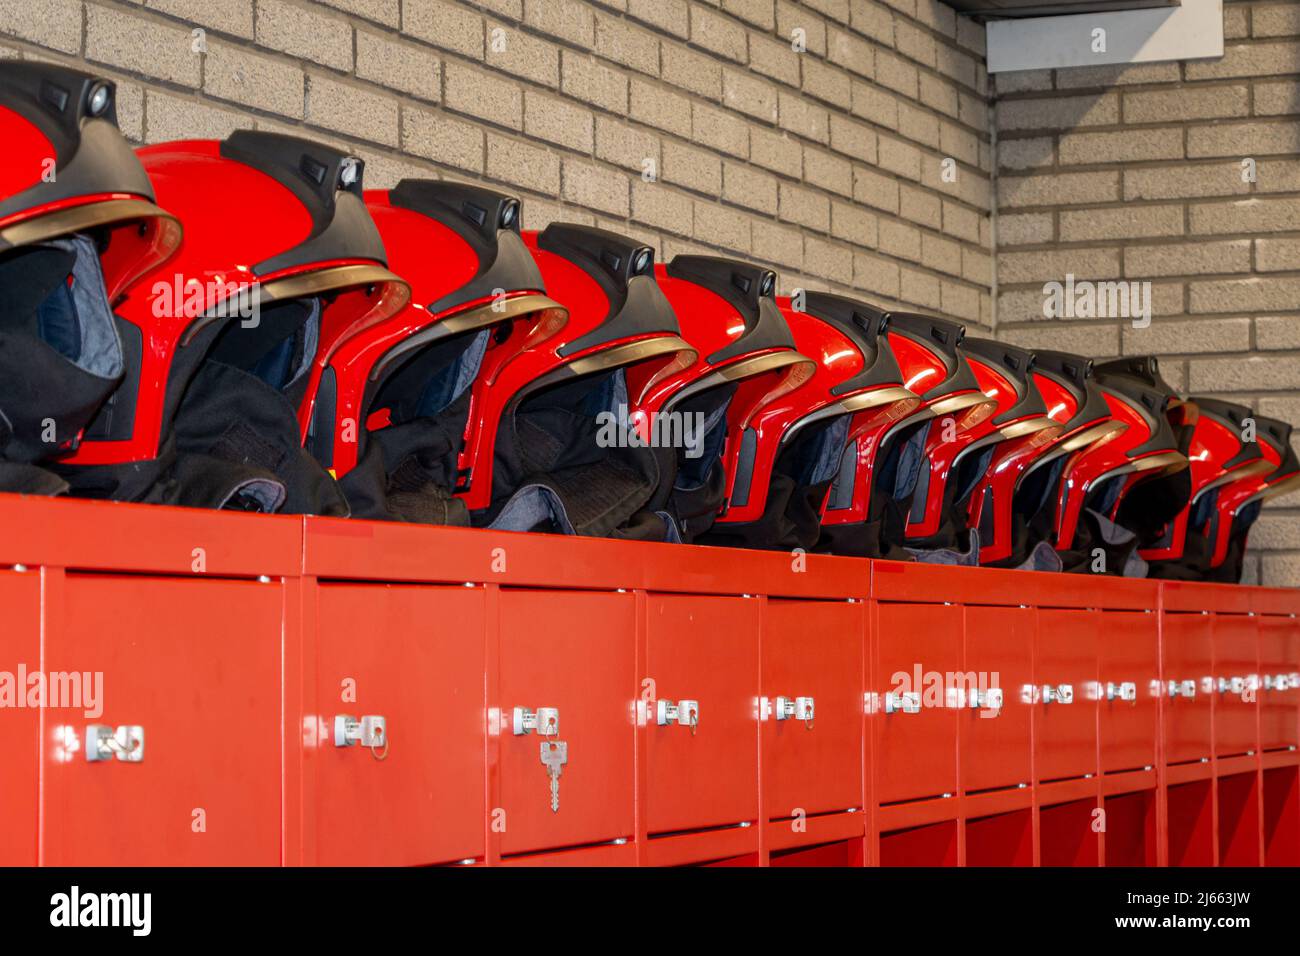 Red fire helmets placed in a row, on top of the fire brigade wardrobes. Ready to fight a fire or calamity Stock Photo